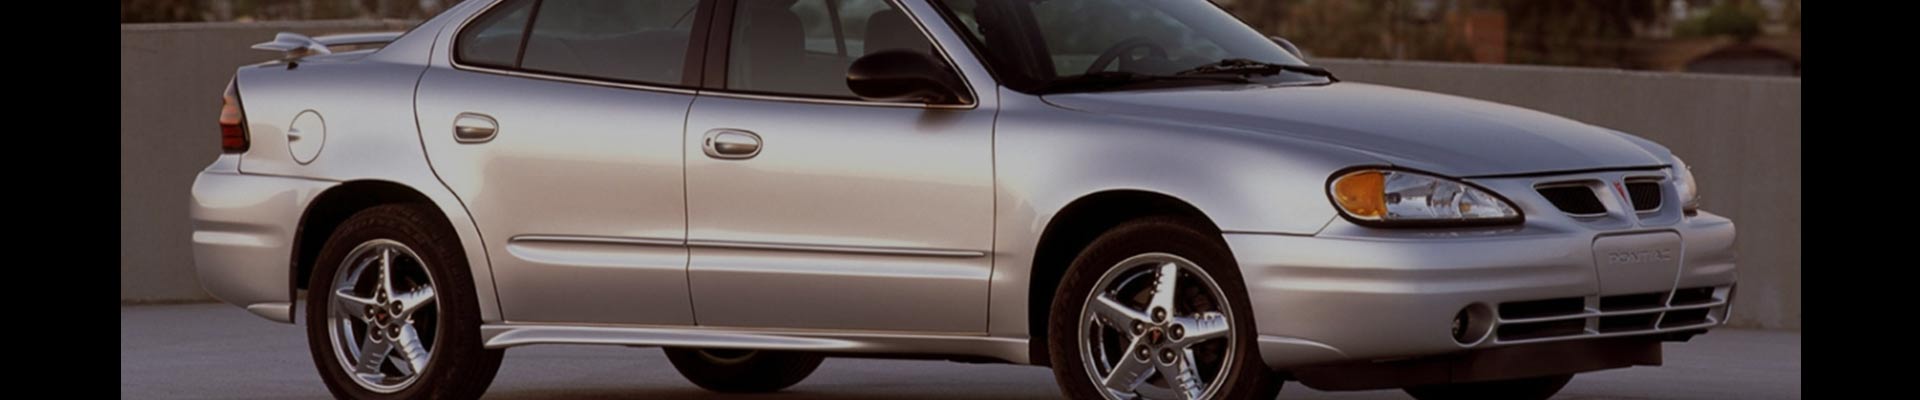 Shop Replacement and OEM 1990 Pontiac Grand Am Parts with Discounted Price on the Net